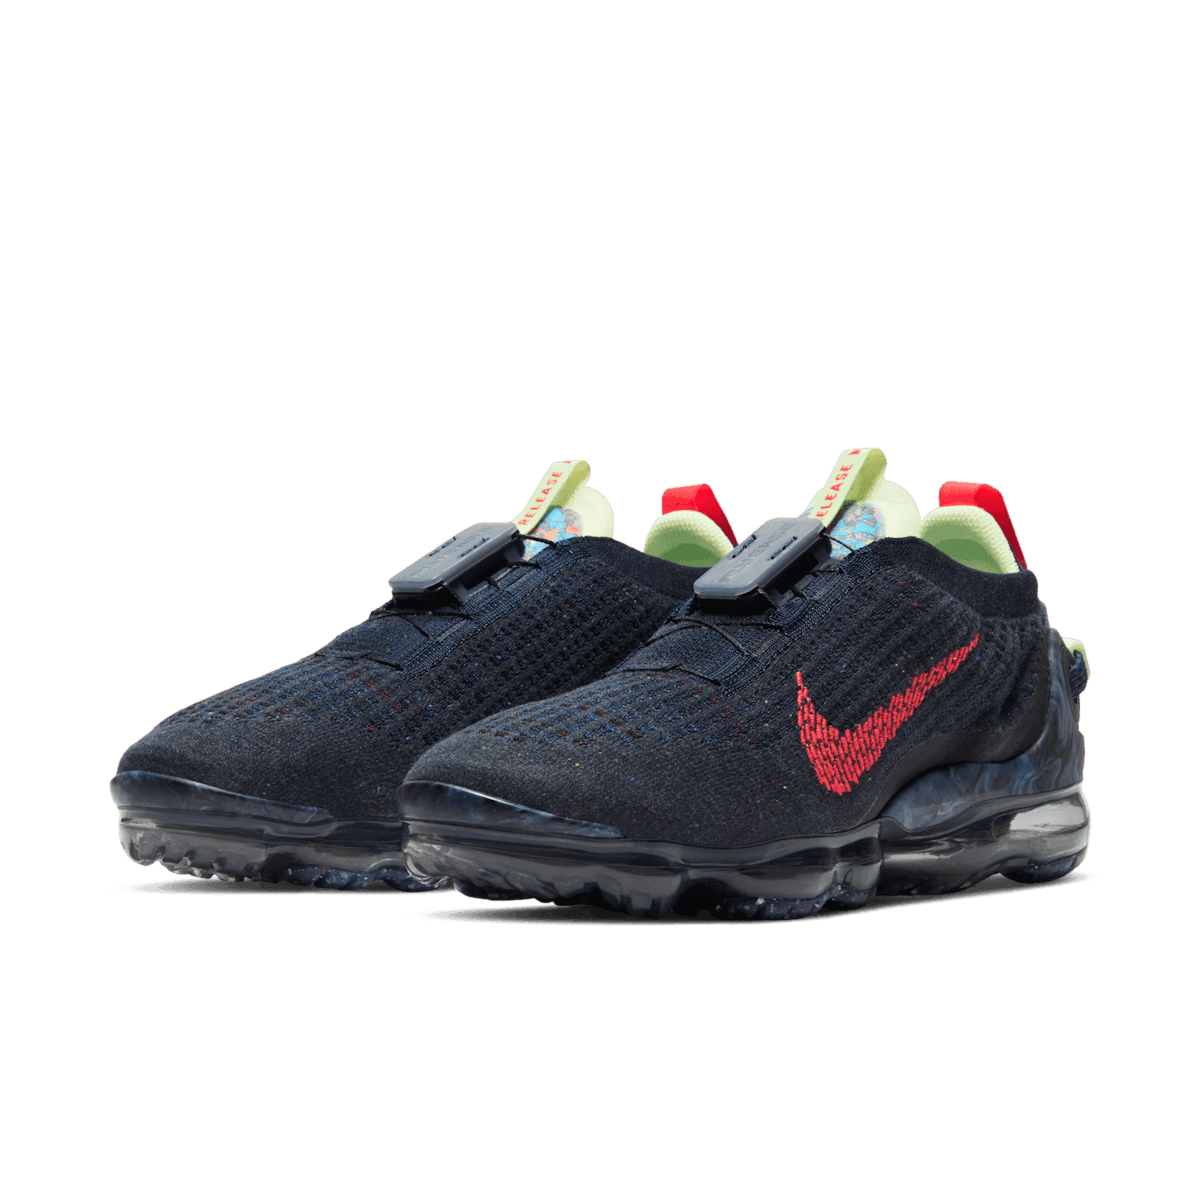 Nike Air VaporMax 2020 Flyknit 'Obsidian Siren Red' Angle 2